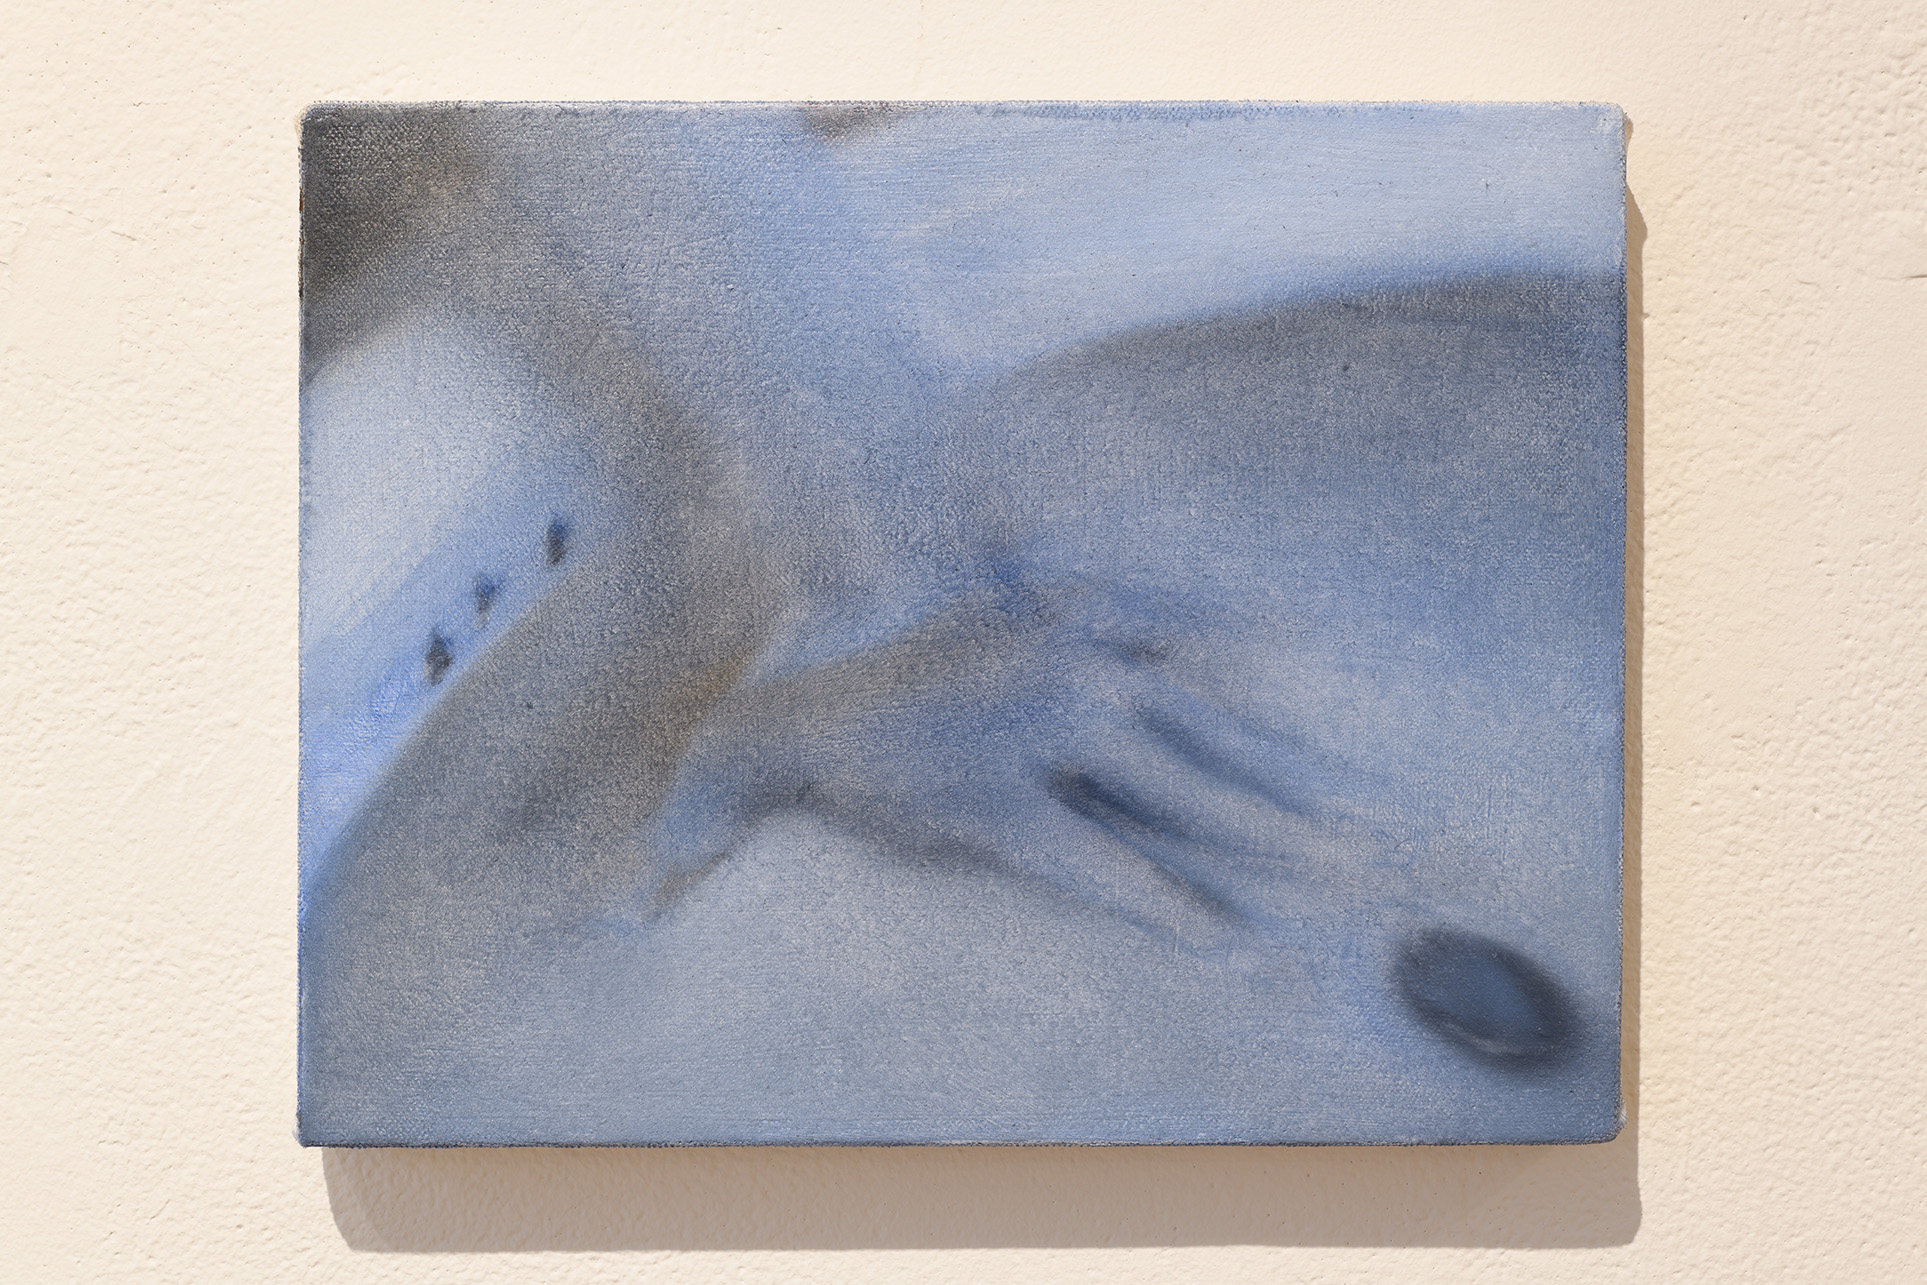 [A small painting showing a hand pressing its palm down into the basin of a bathroom sink. The sink’s drain also looks like a belly button or a bodily orifice and the hand, arm, and sink are rendered in the same blue-gray manner.]